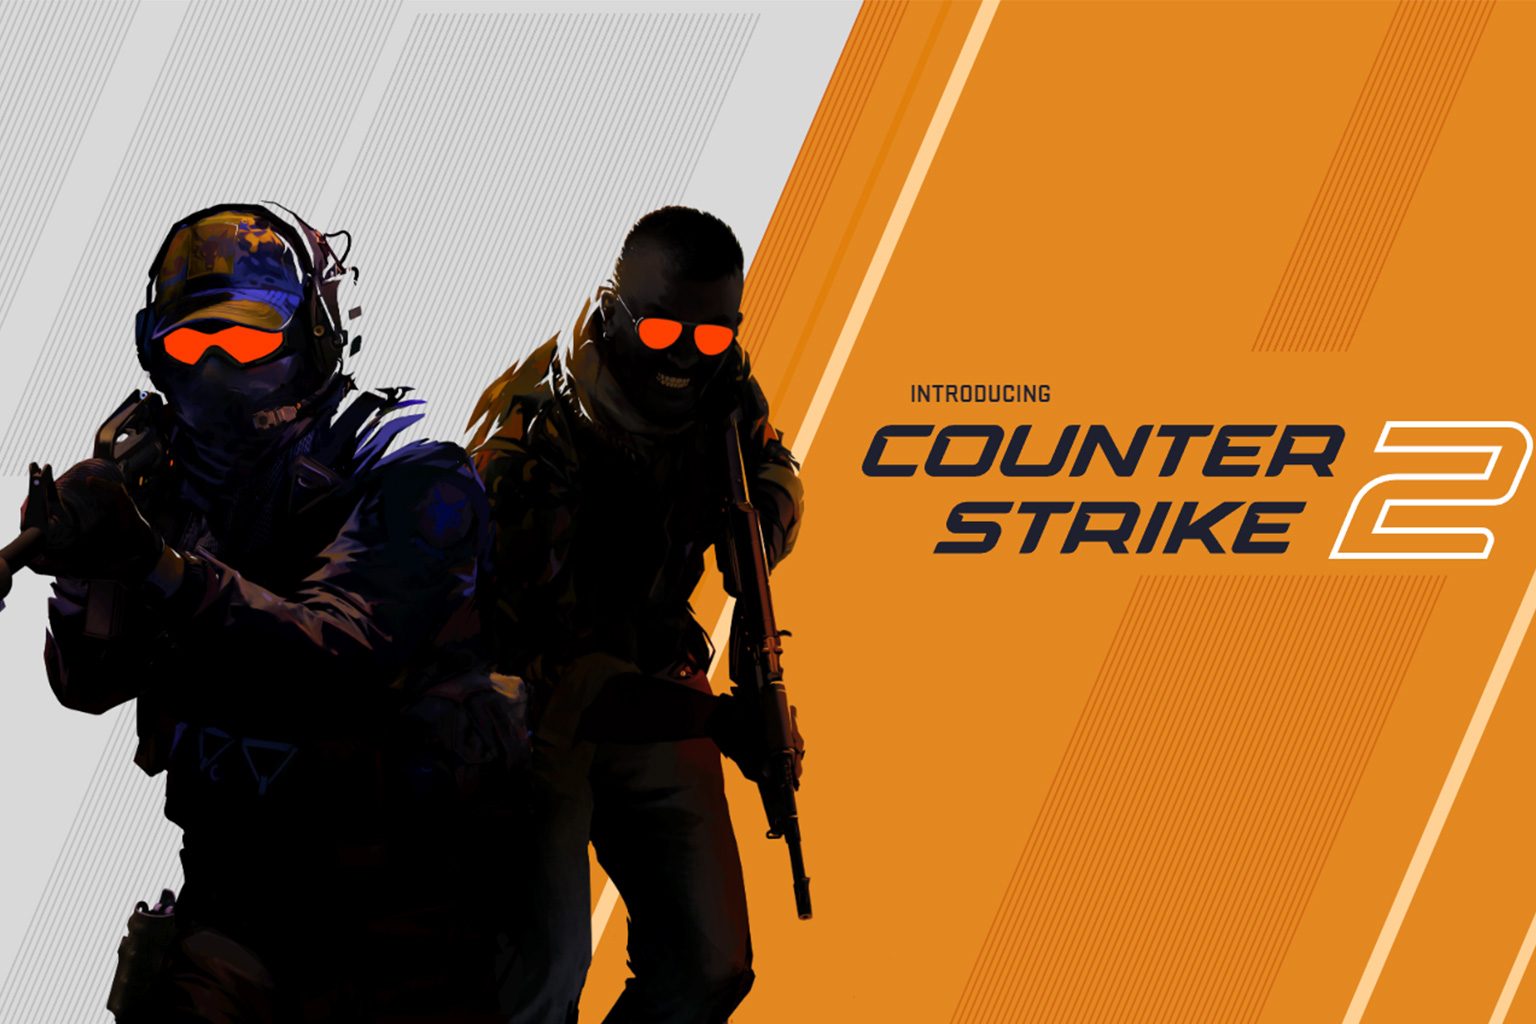 Counter-Strike 2's Surprise Launch Received Positively By Fans